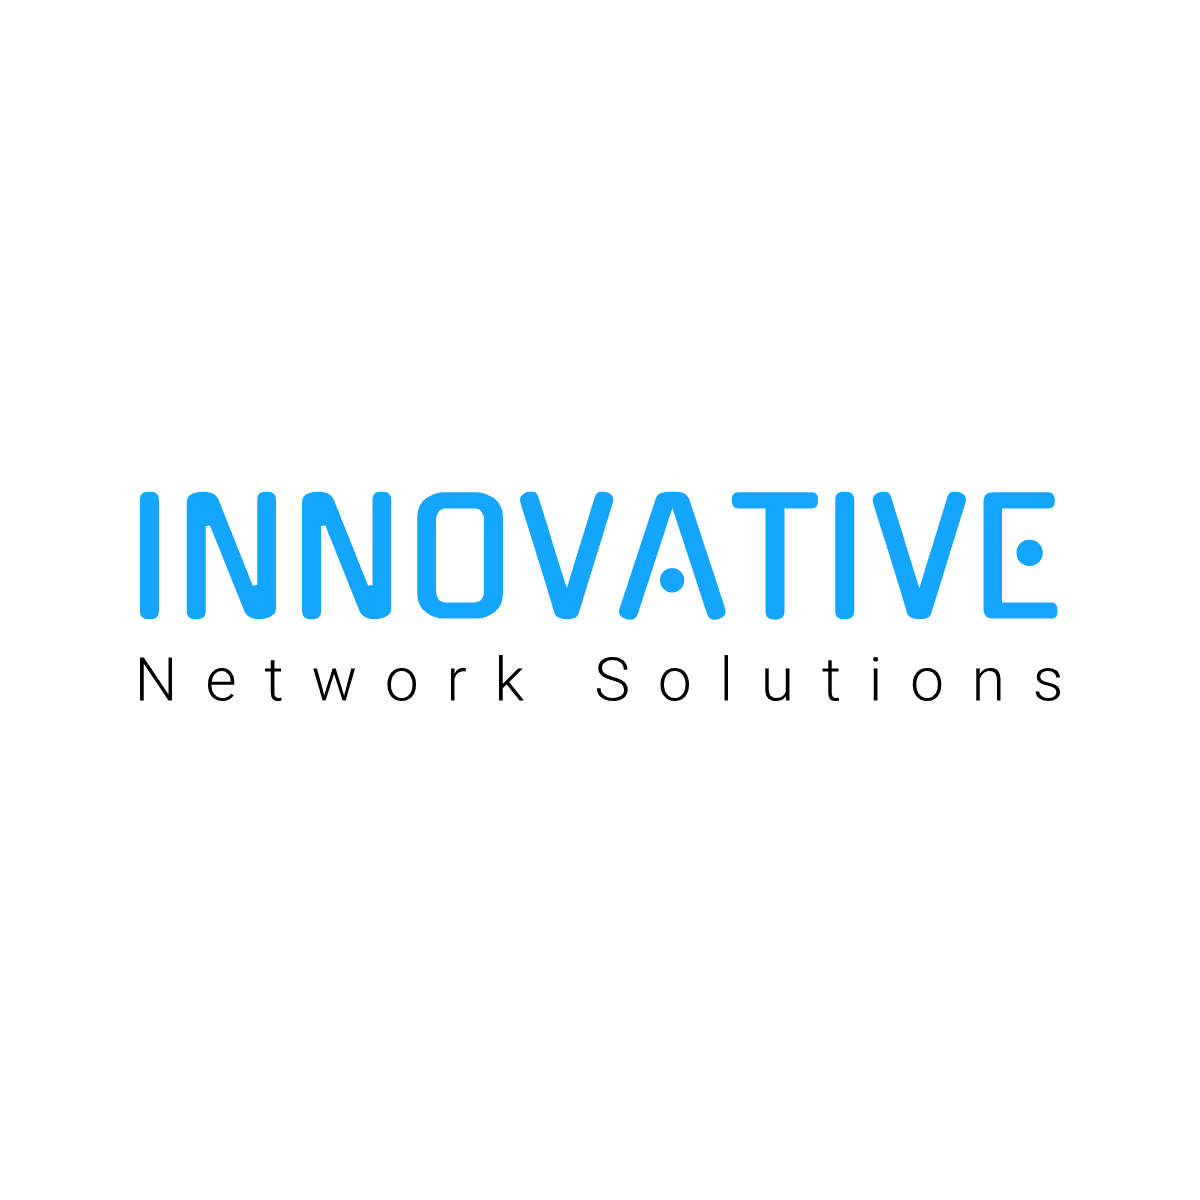 Product Services | Innovative Network Solutions | United States image